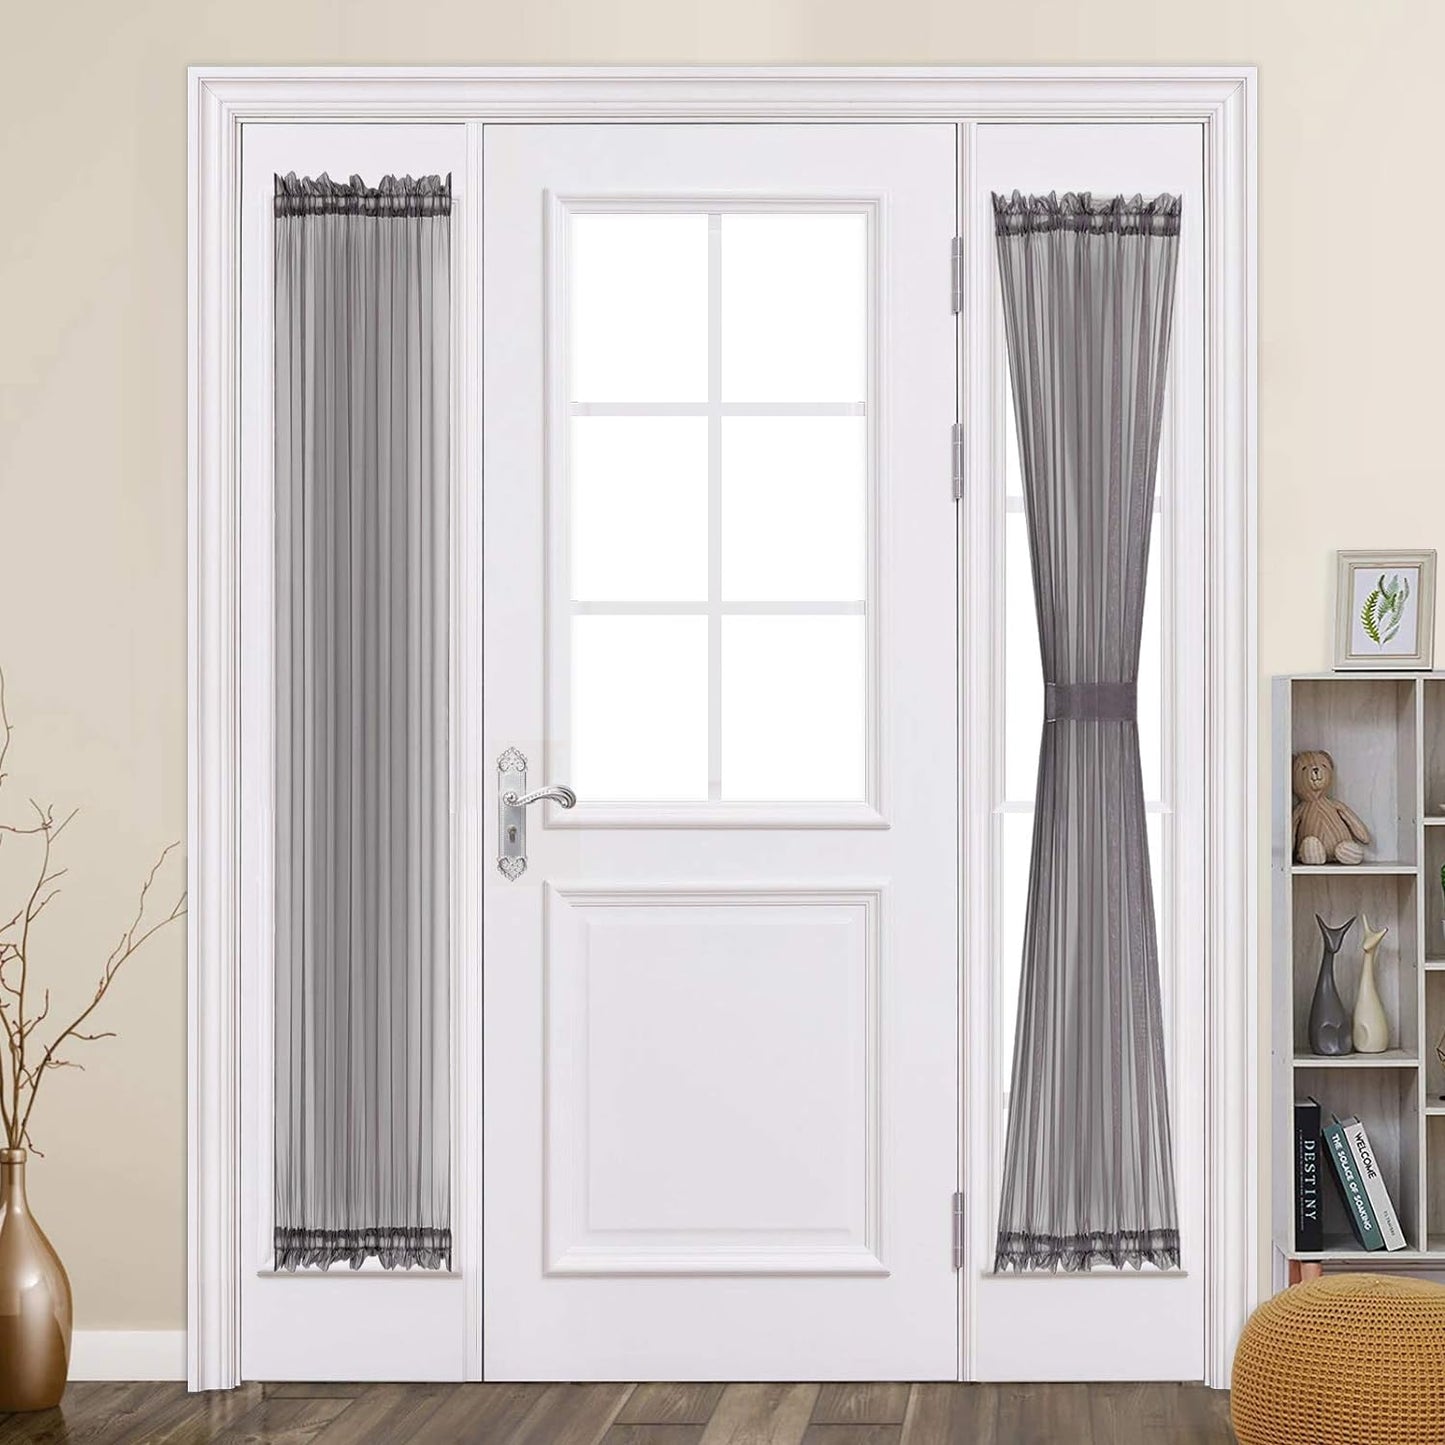 MIULEE French Door Sheer Curtains for Front Back Patio Glass Door Light Filtering Window Treatment with 2 Tiebacks 54 Wide and 72 Inches Length, White, Set of 2  MIULEE Dark Grey 25"W X 72"L 